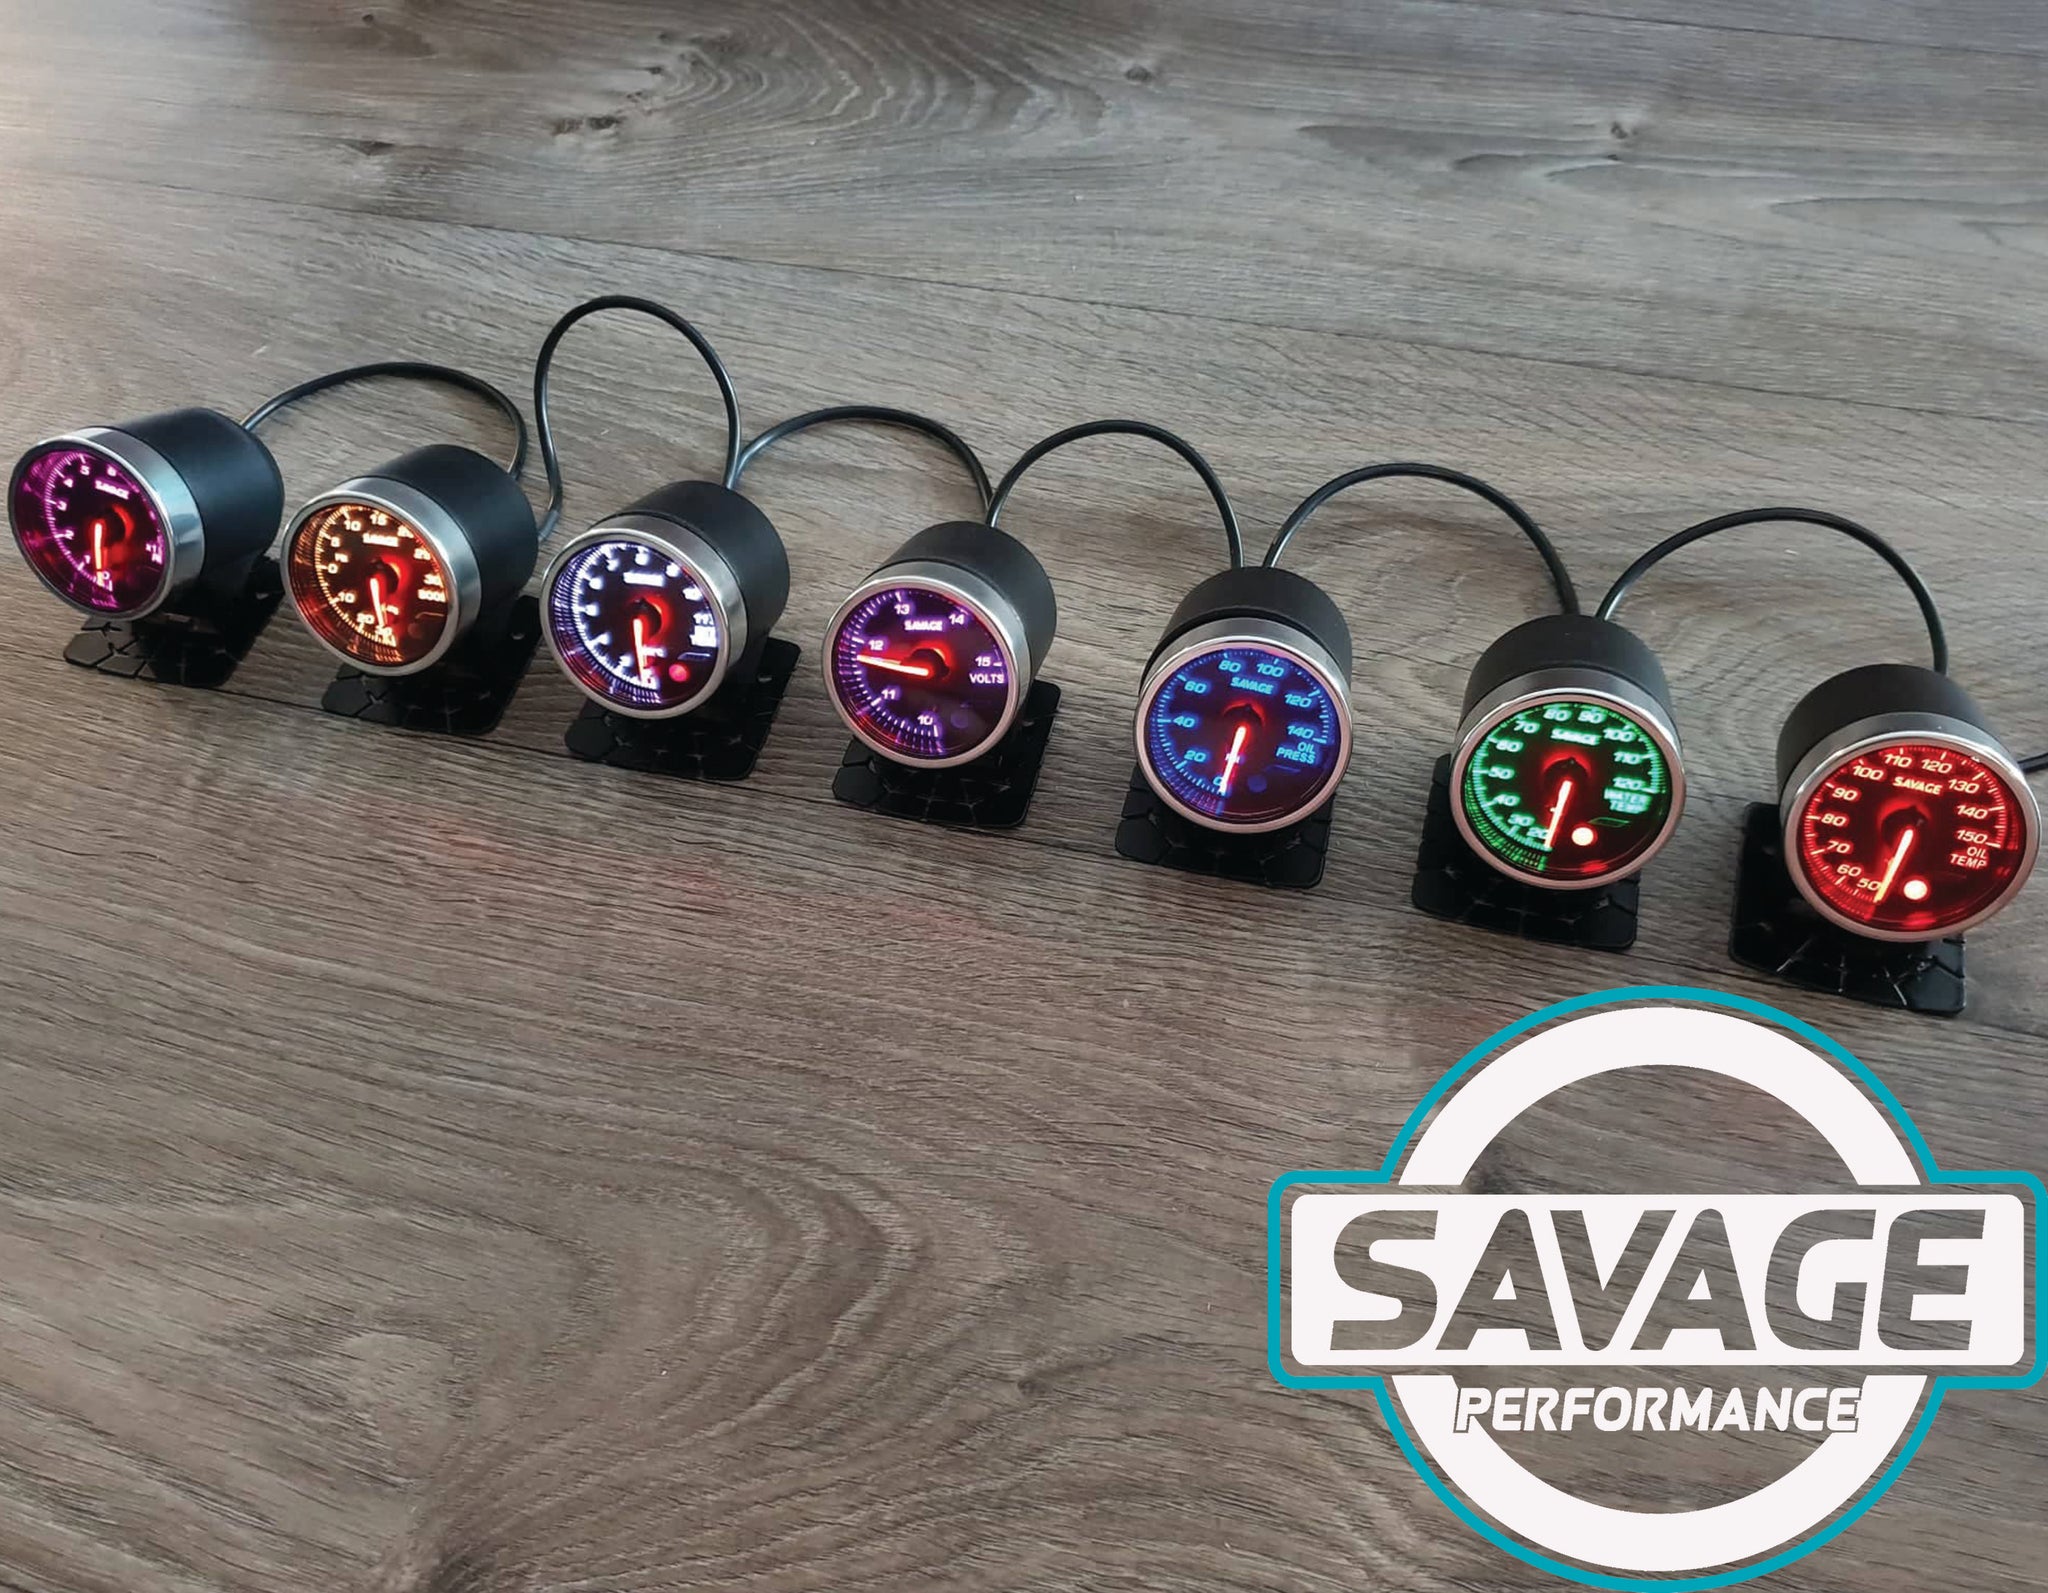 52mm Savage AFR Wideband (Air Fuel Ratio) Gauge 7 Colours